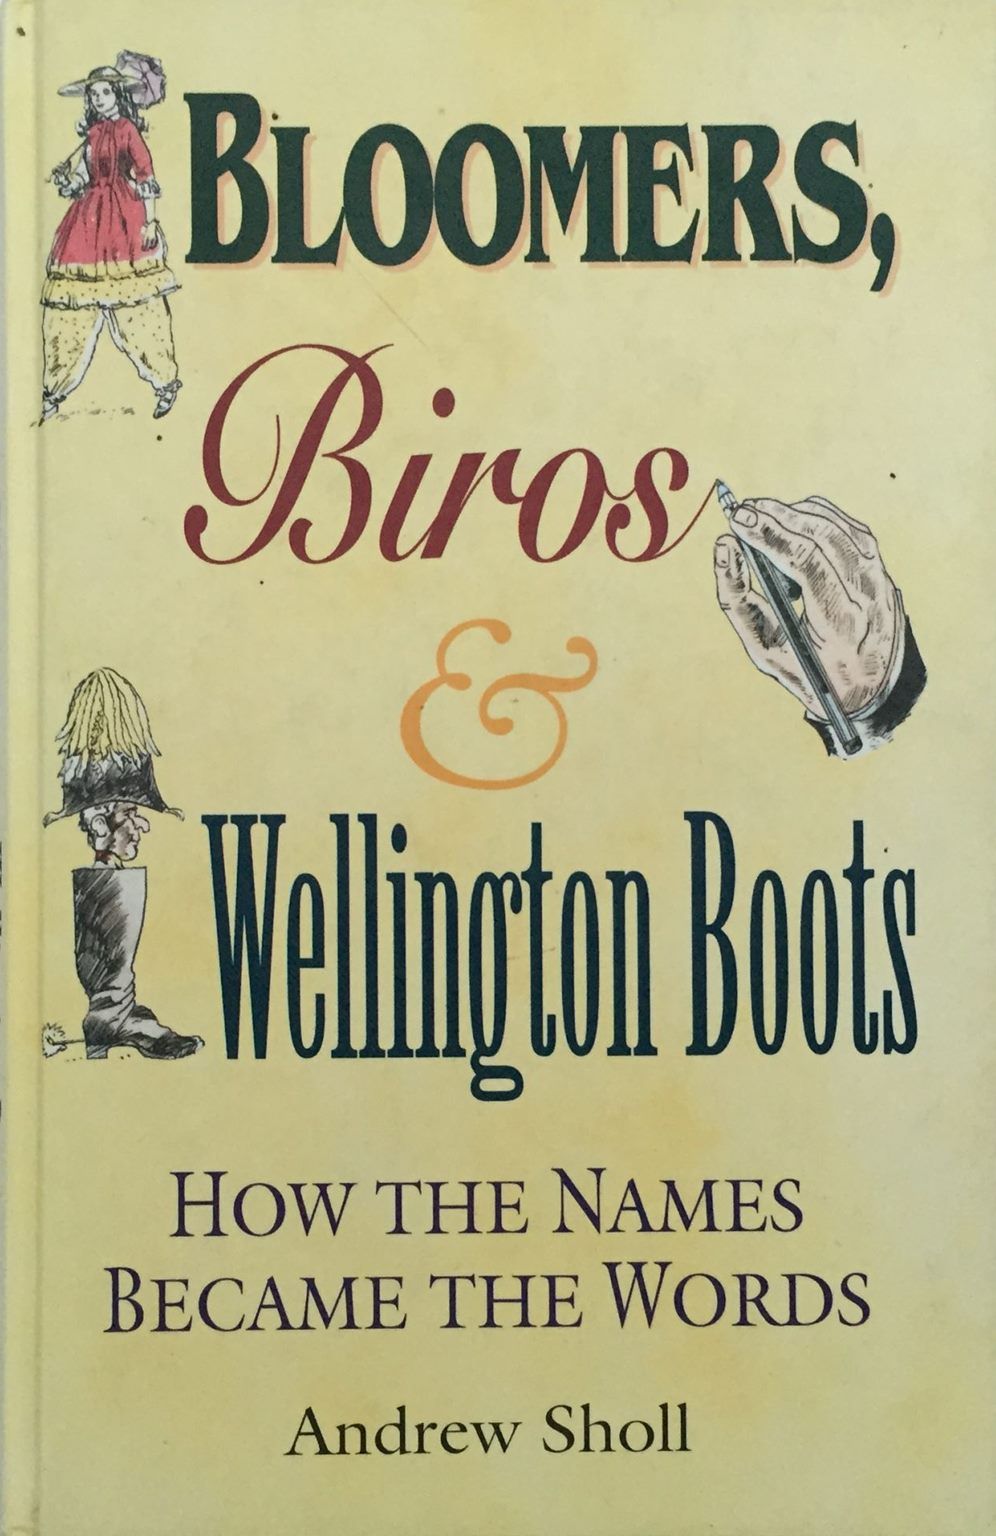 BLOOMERS, BIROS & WELLINGTON BOOTS: How The Names Became The Words